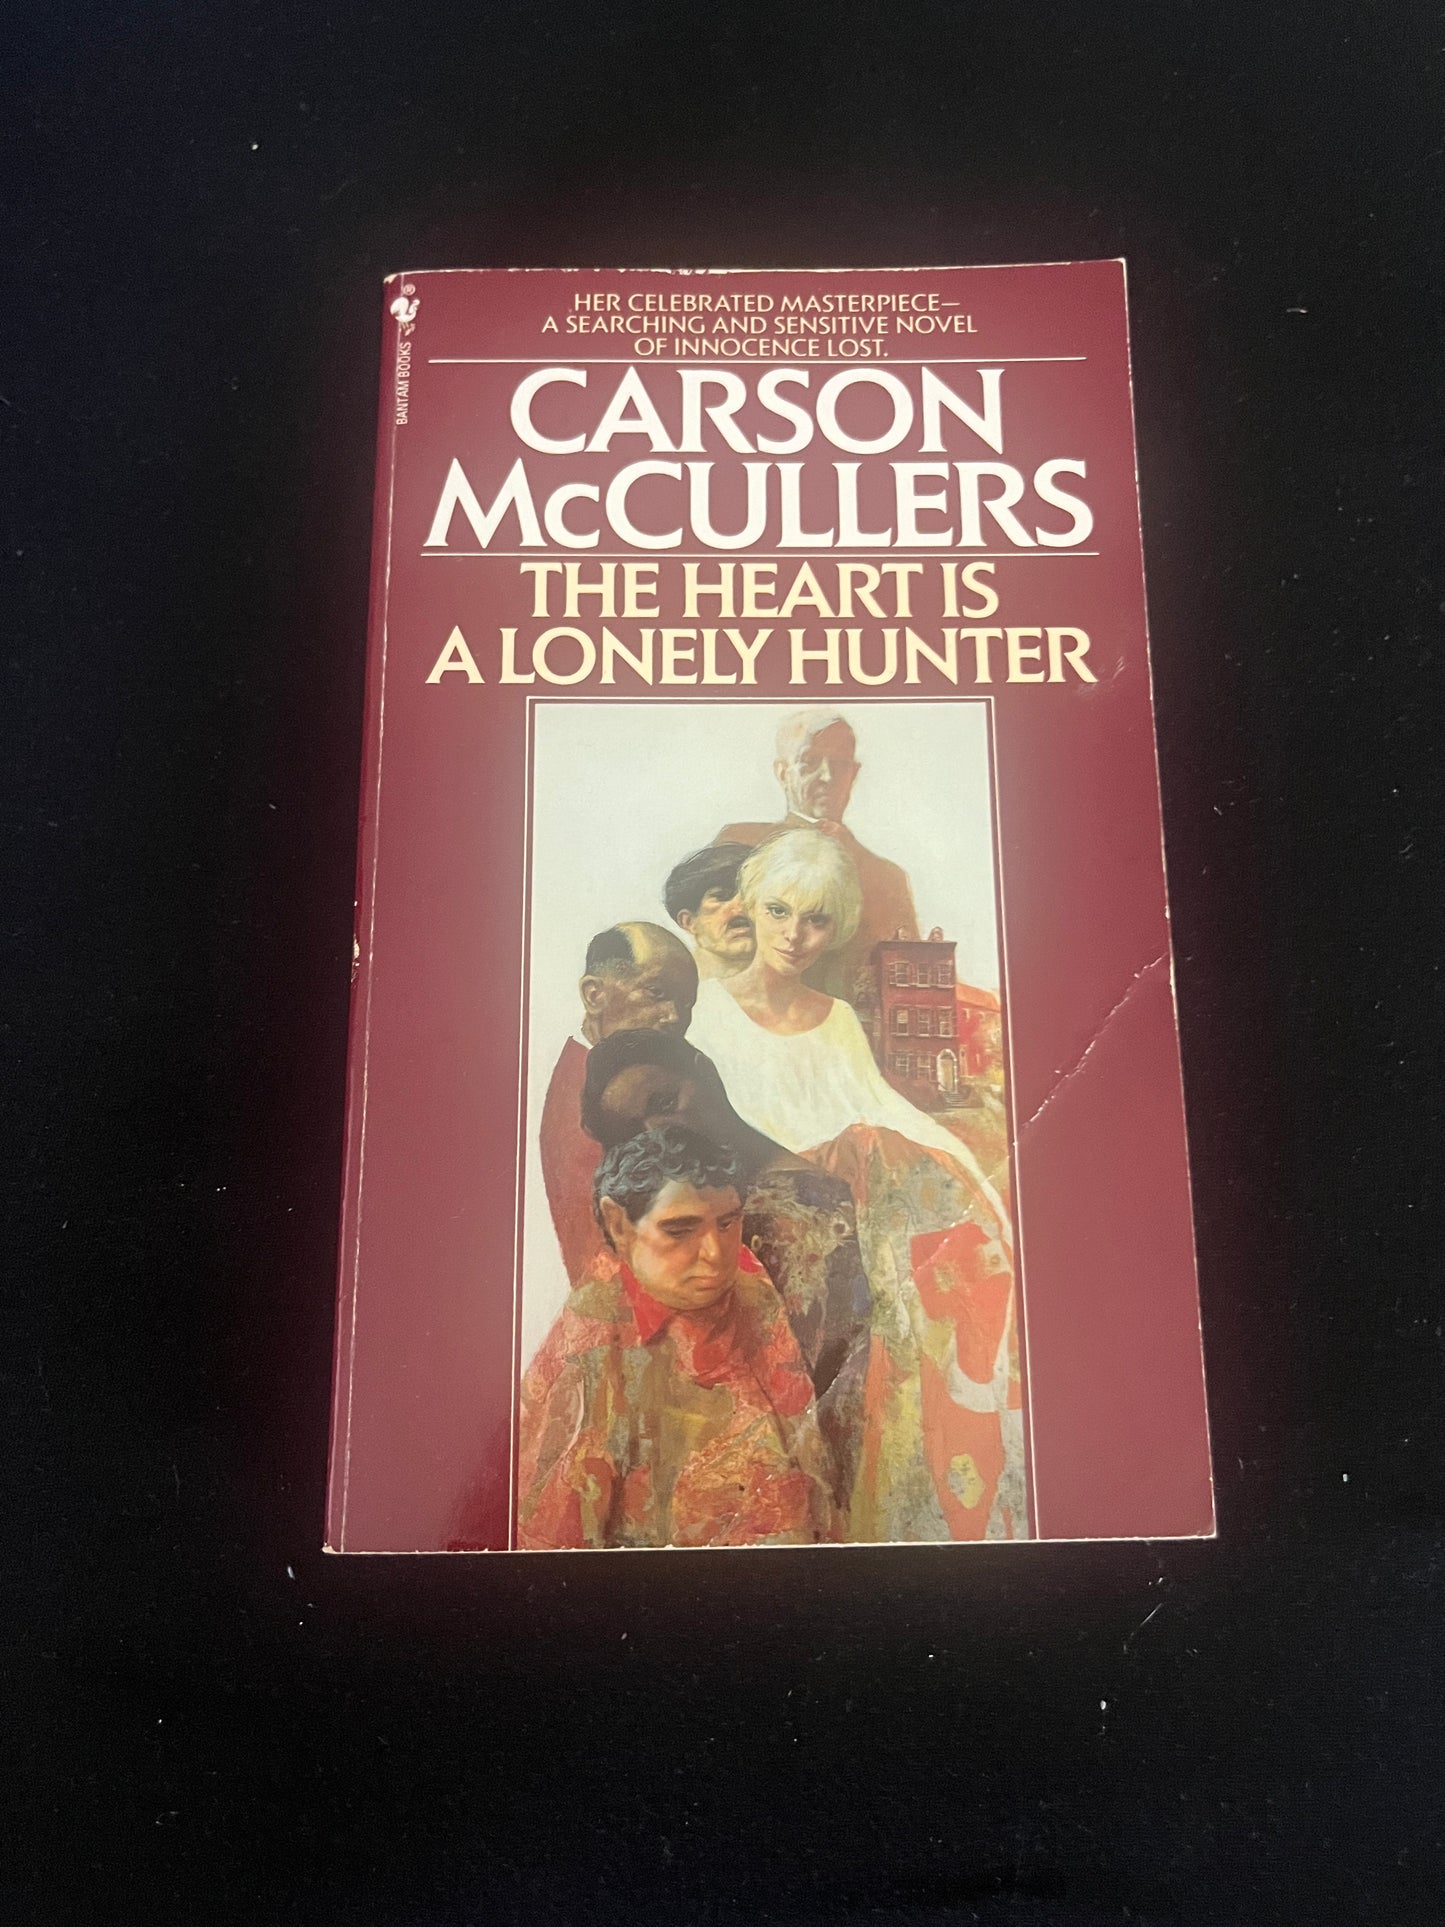 THE HEART IS A LONELY HUNTER by Carson McCullers